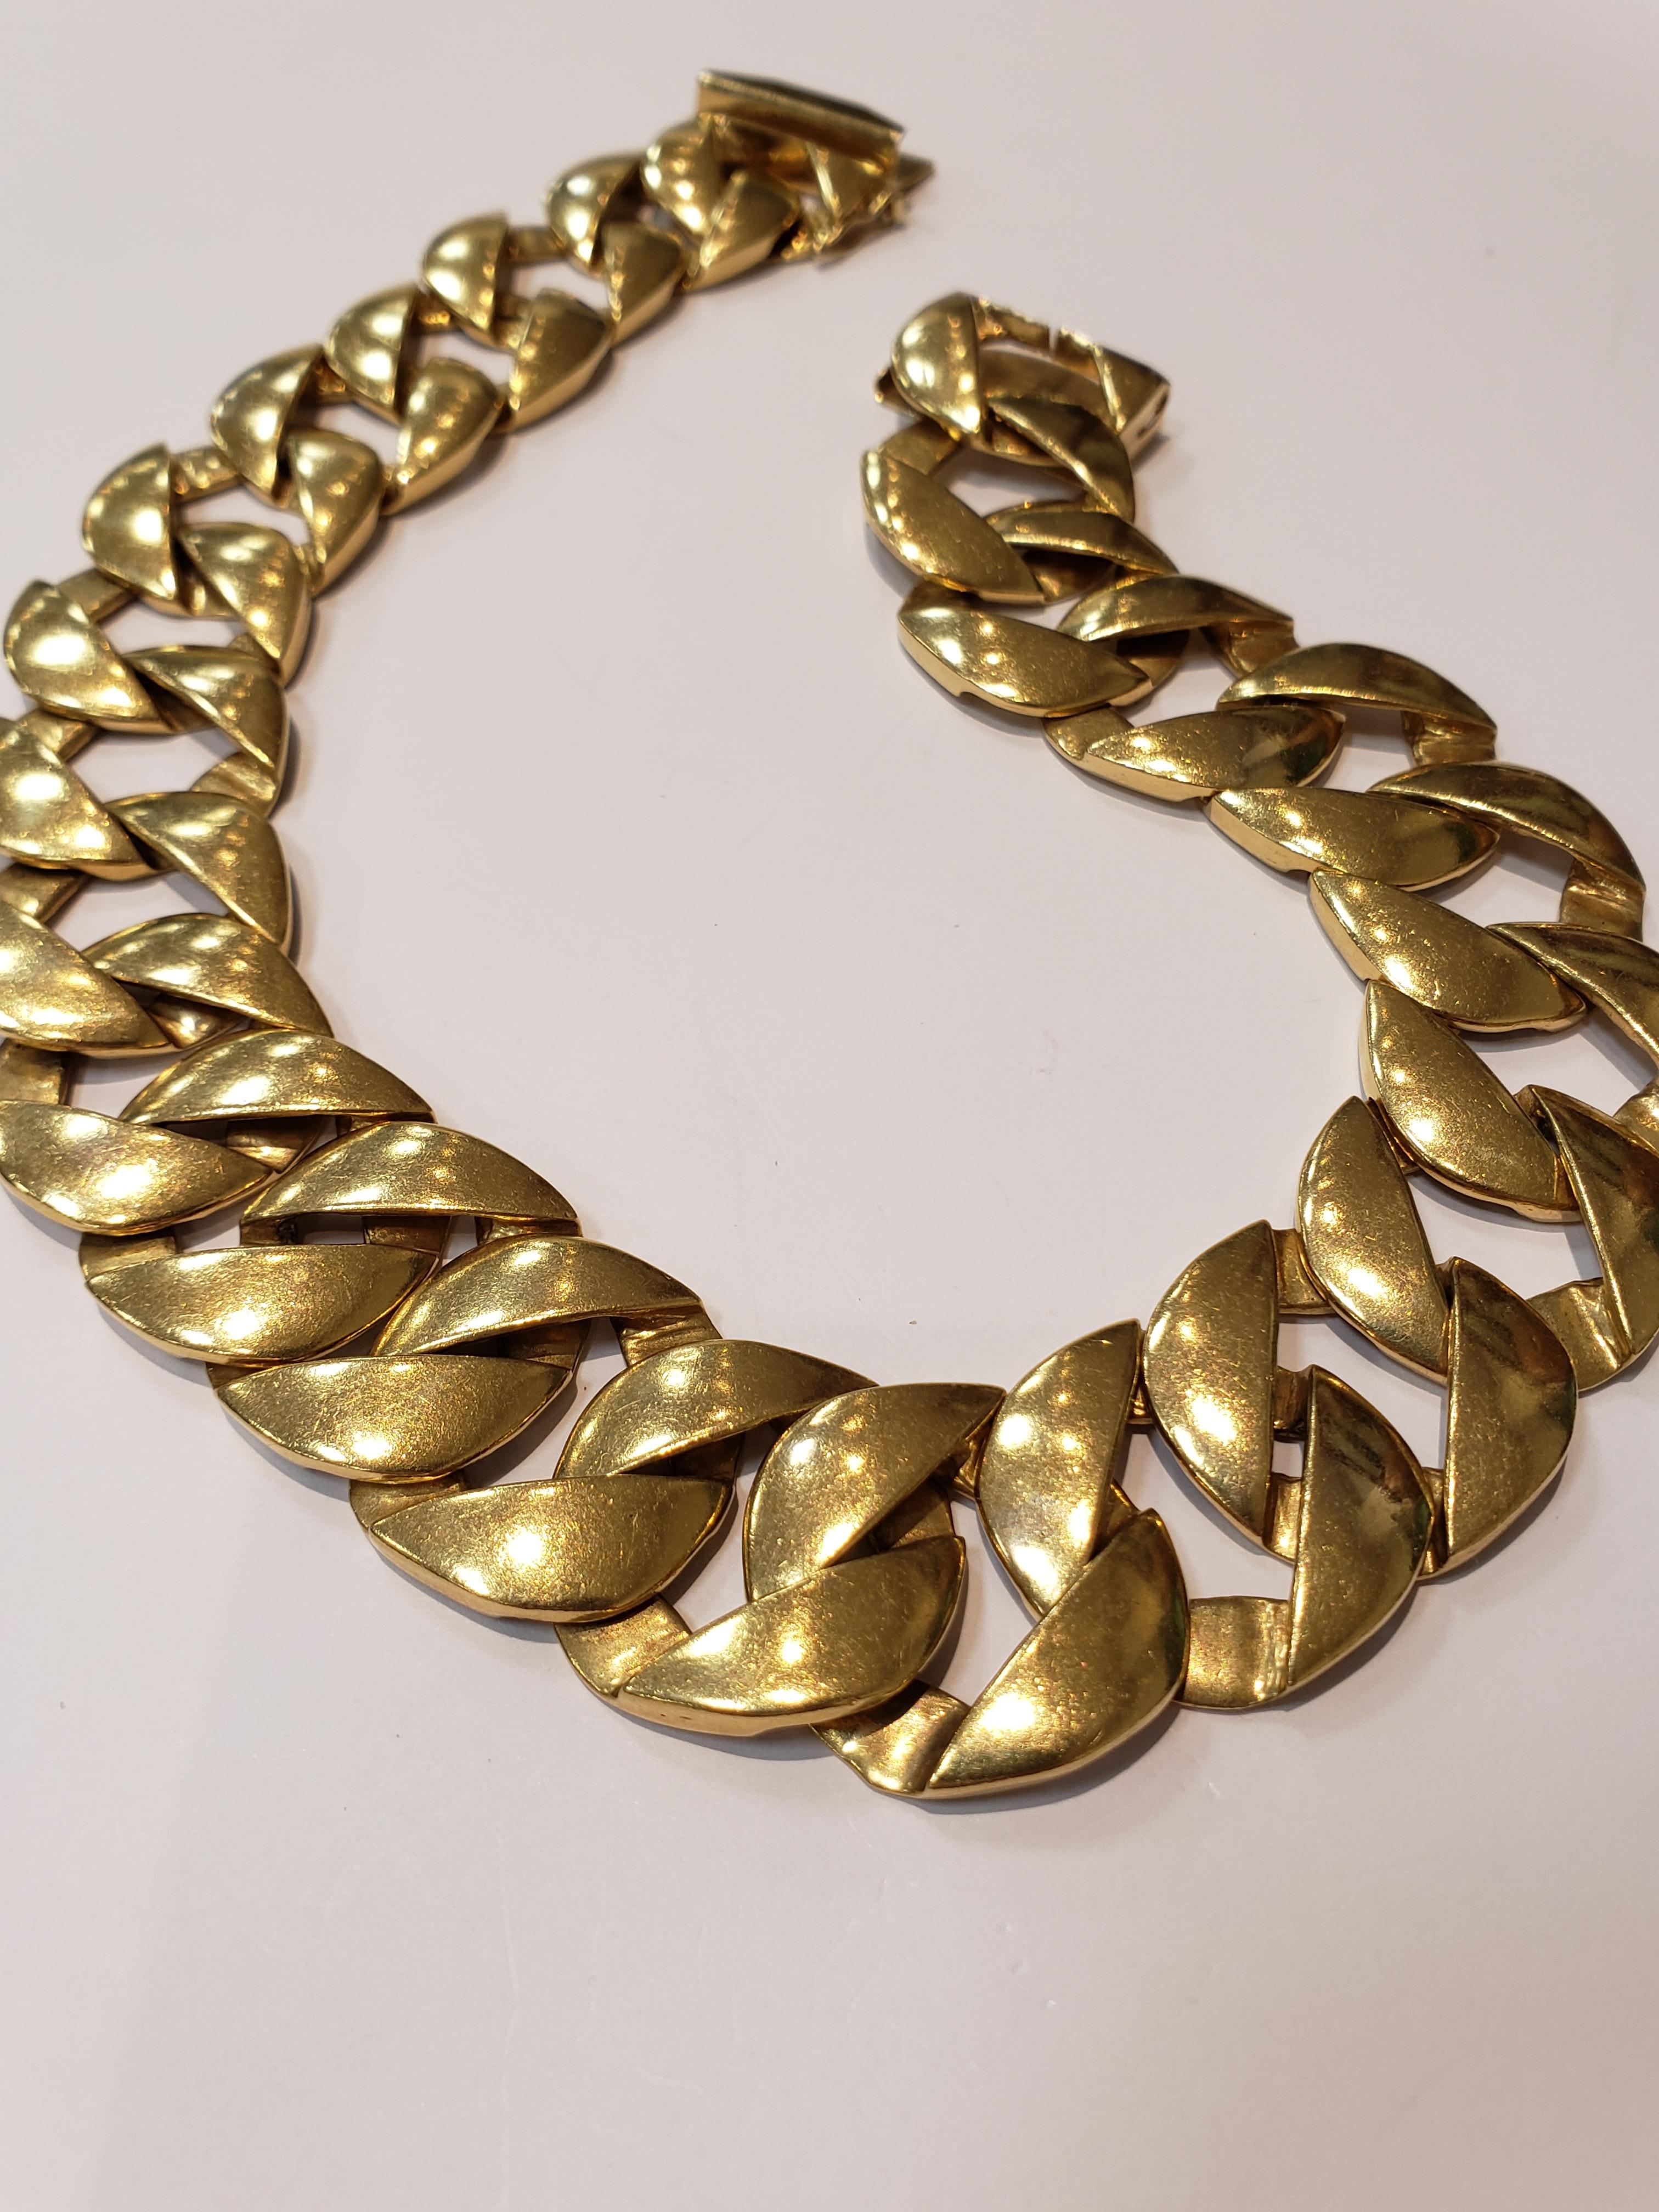 Heavy Solid 18 Karat Yellow Gold Round Link Necklace In Fair Condition For Sale In Red Bank, NJ